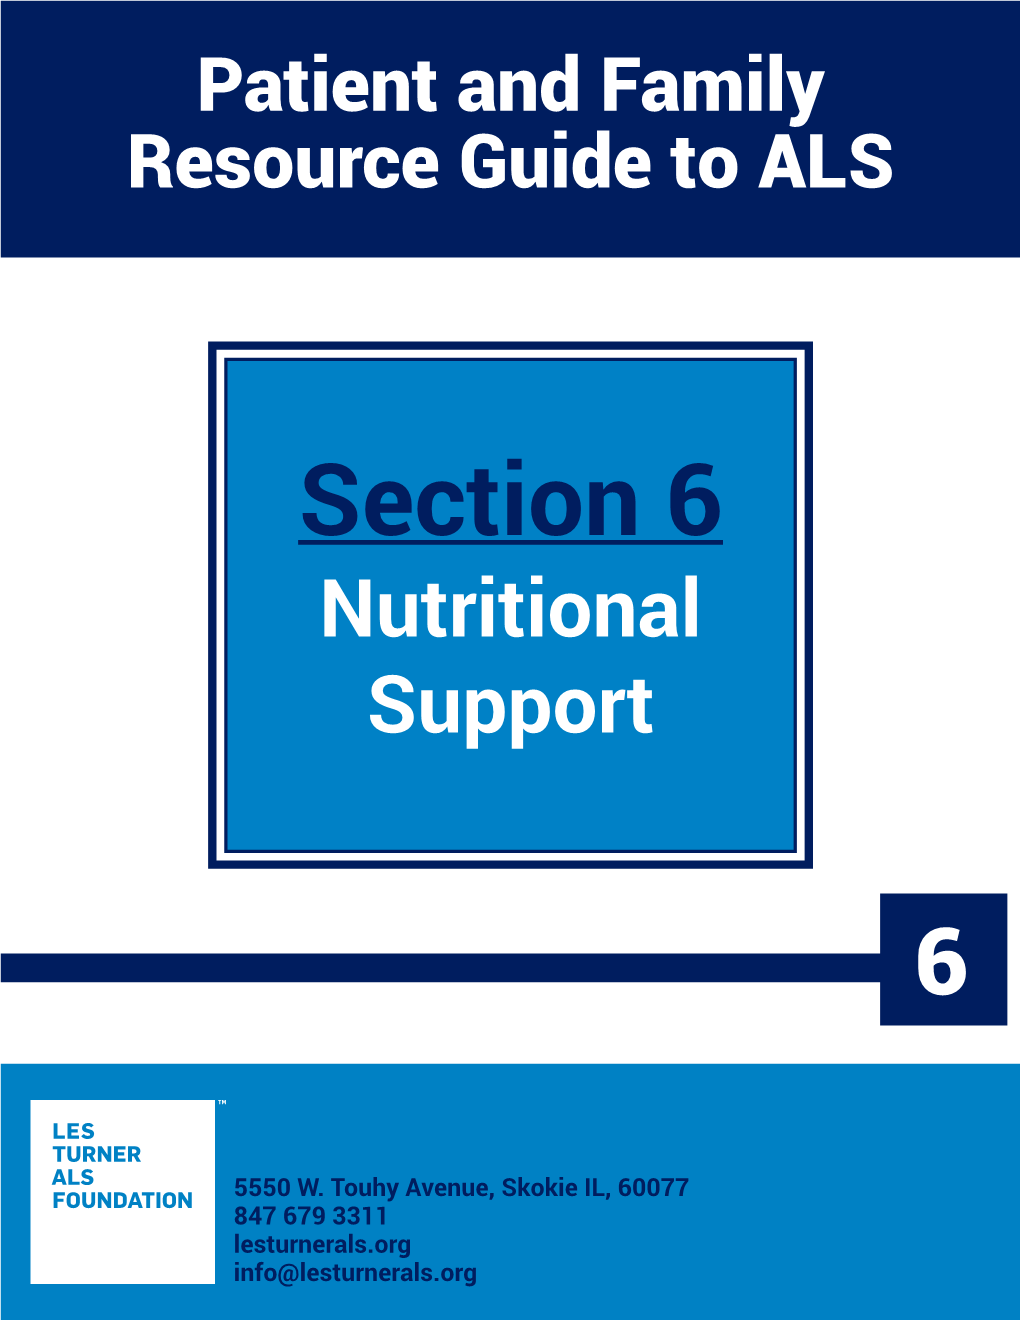 Section 6 Nutritional Support